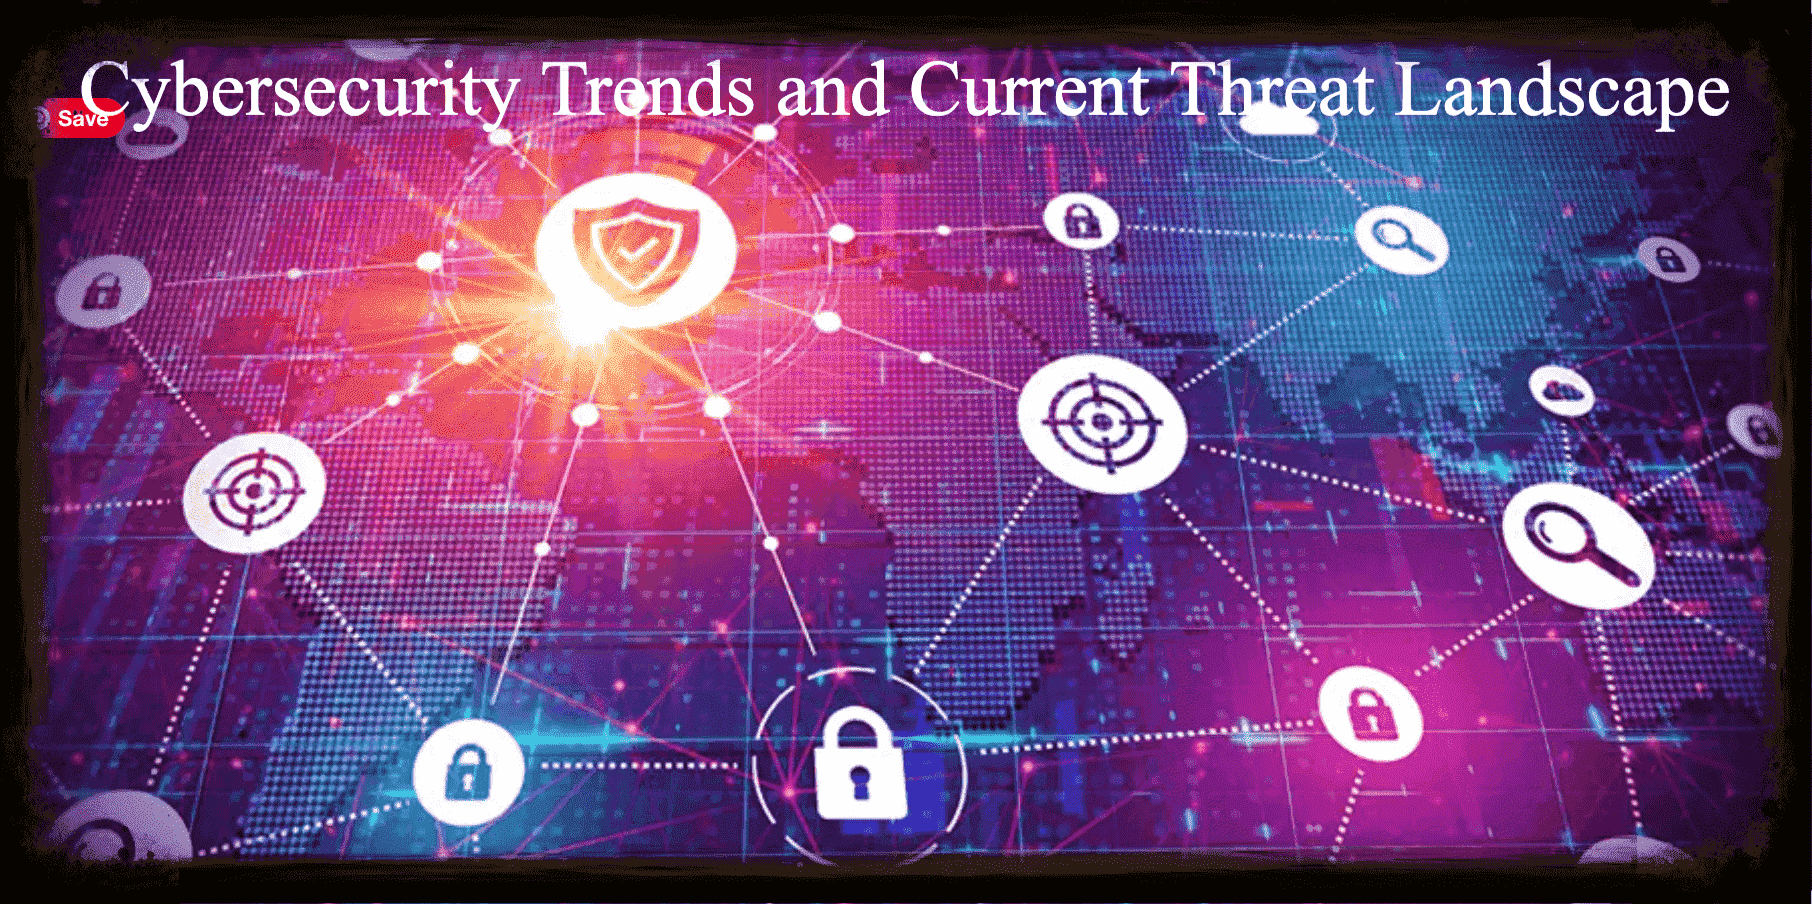 Cybersecurity Trends and Cybersecurity Current Threat Landscape